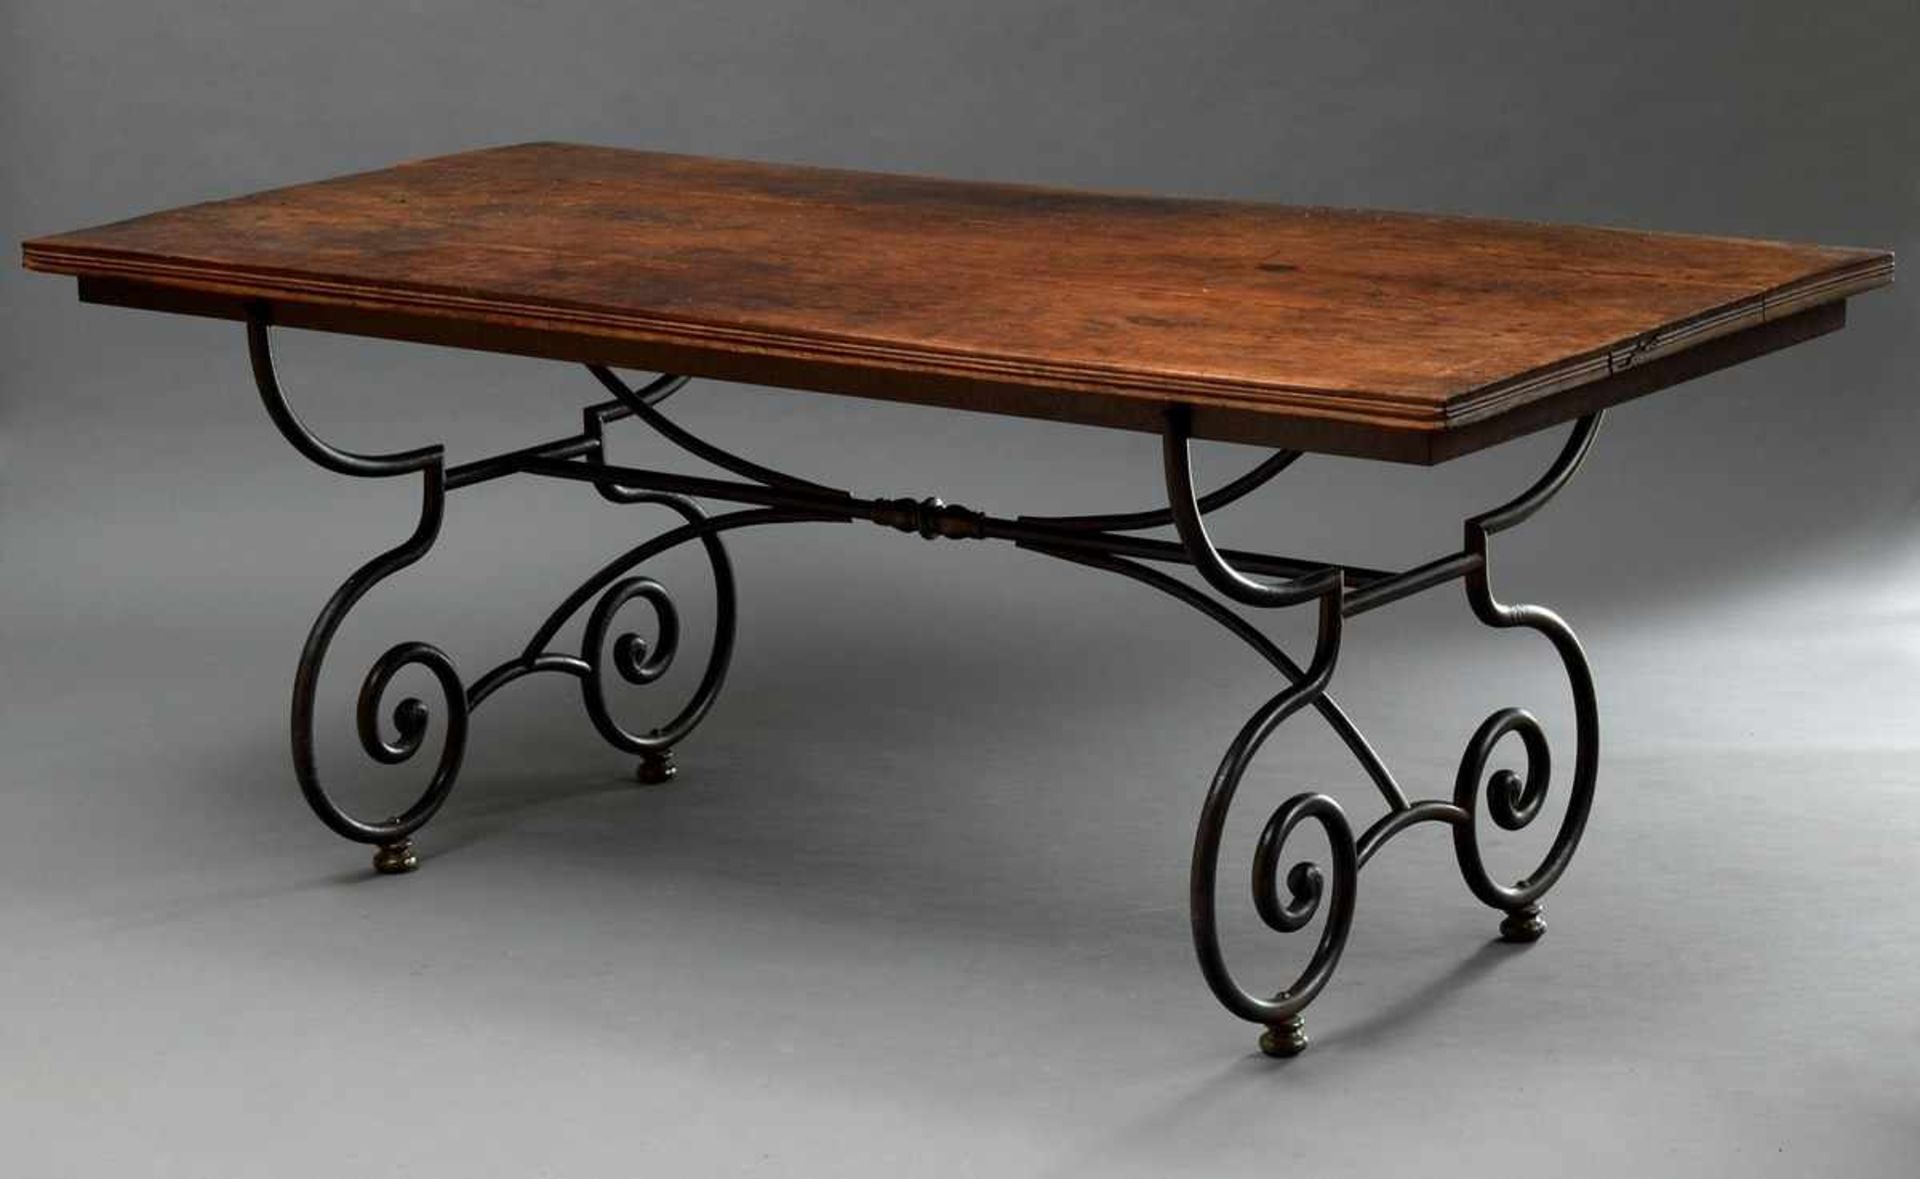 Large french shop table on forged iron frame, 75.5x189x91.5cm, acquired from Hans Otto Beute/Hbg.